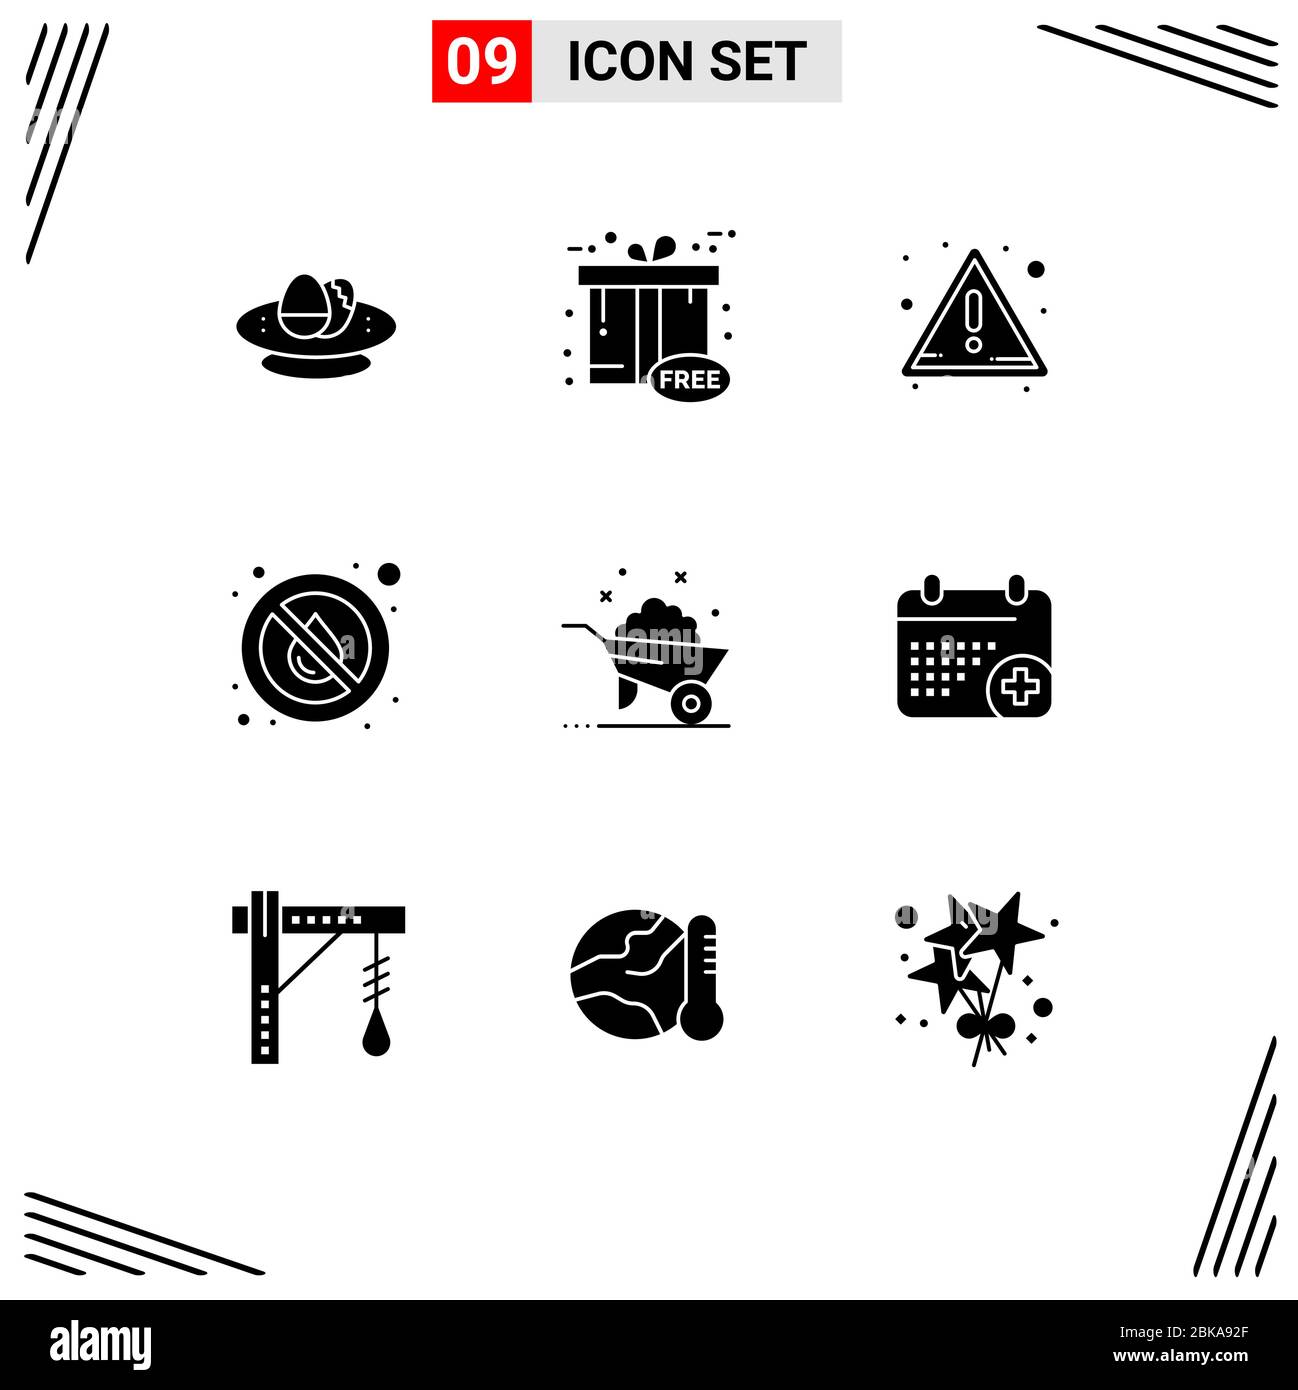 User Interface Pack of 9 Basic Solid Glyphs of barrow, water, gift box, rain, drop Editable Vector Design Elements Stock Vector